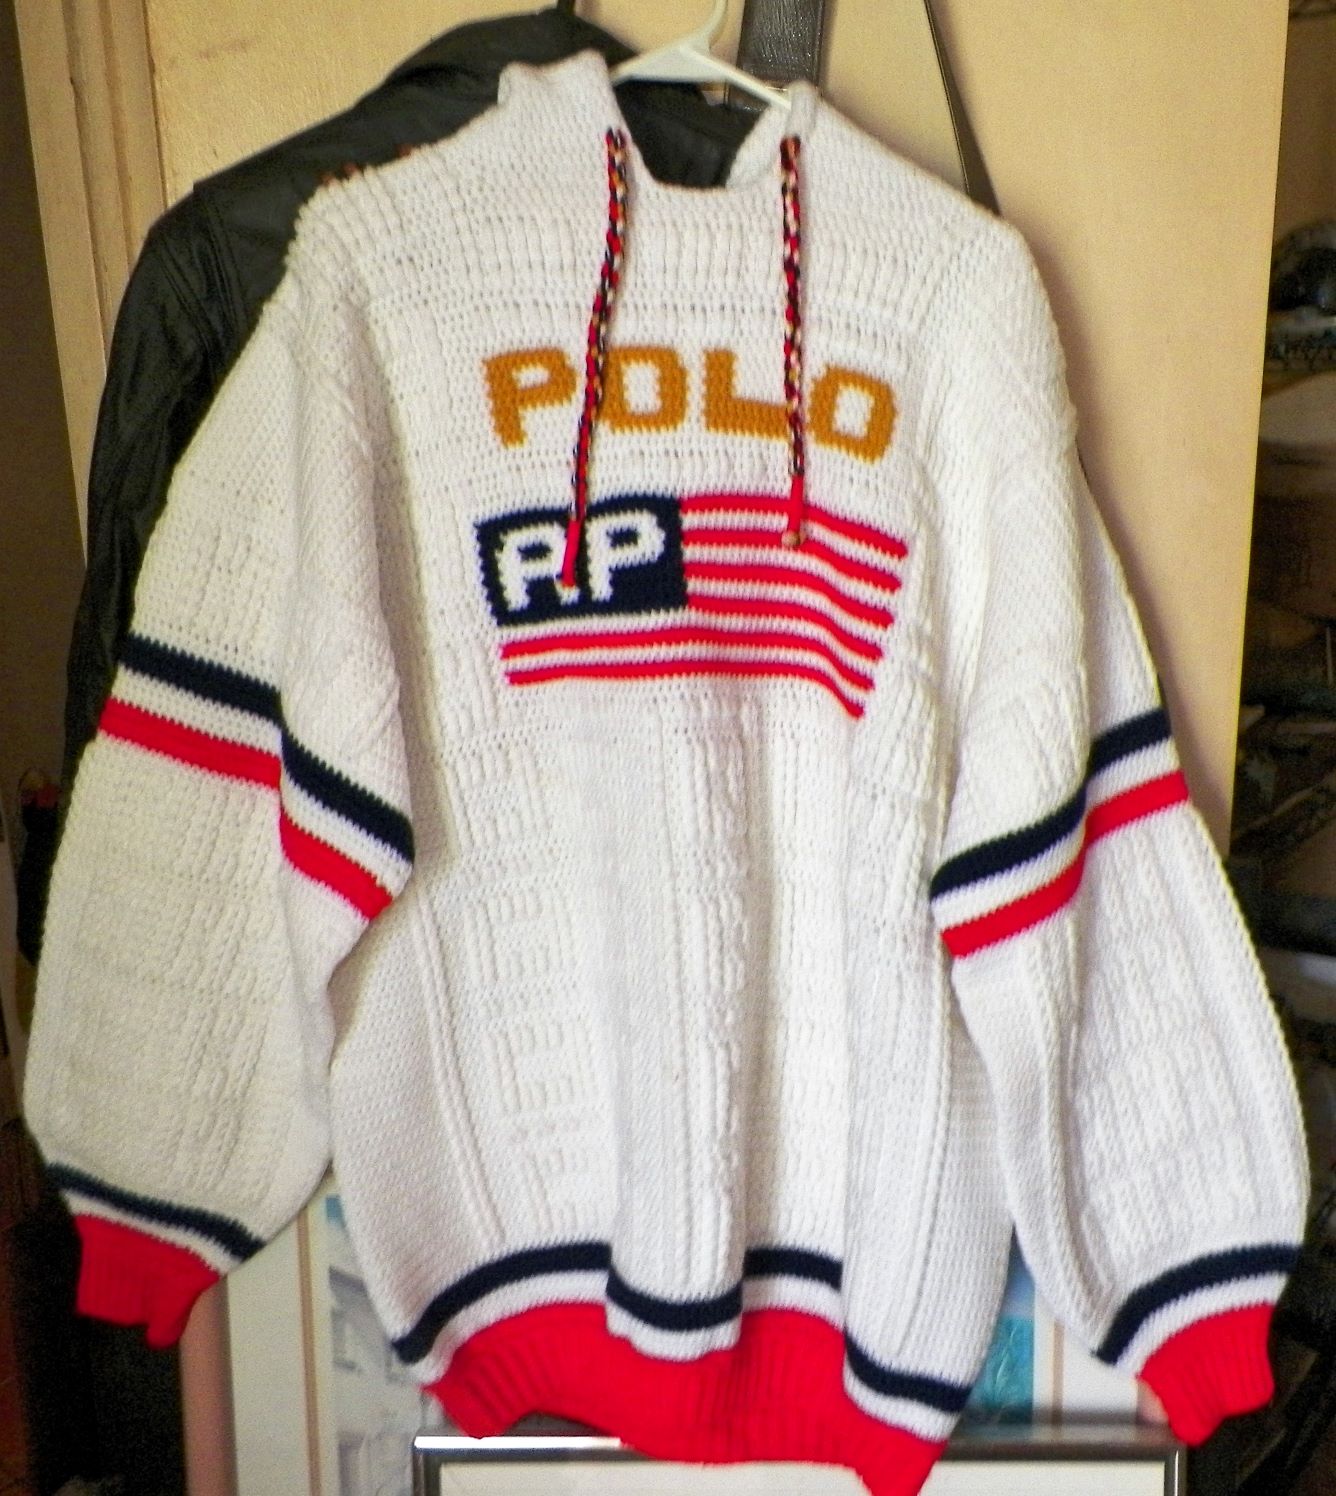 How to Thrift Shop for Vintage Ralph Lauren Clothing